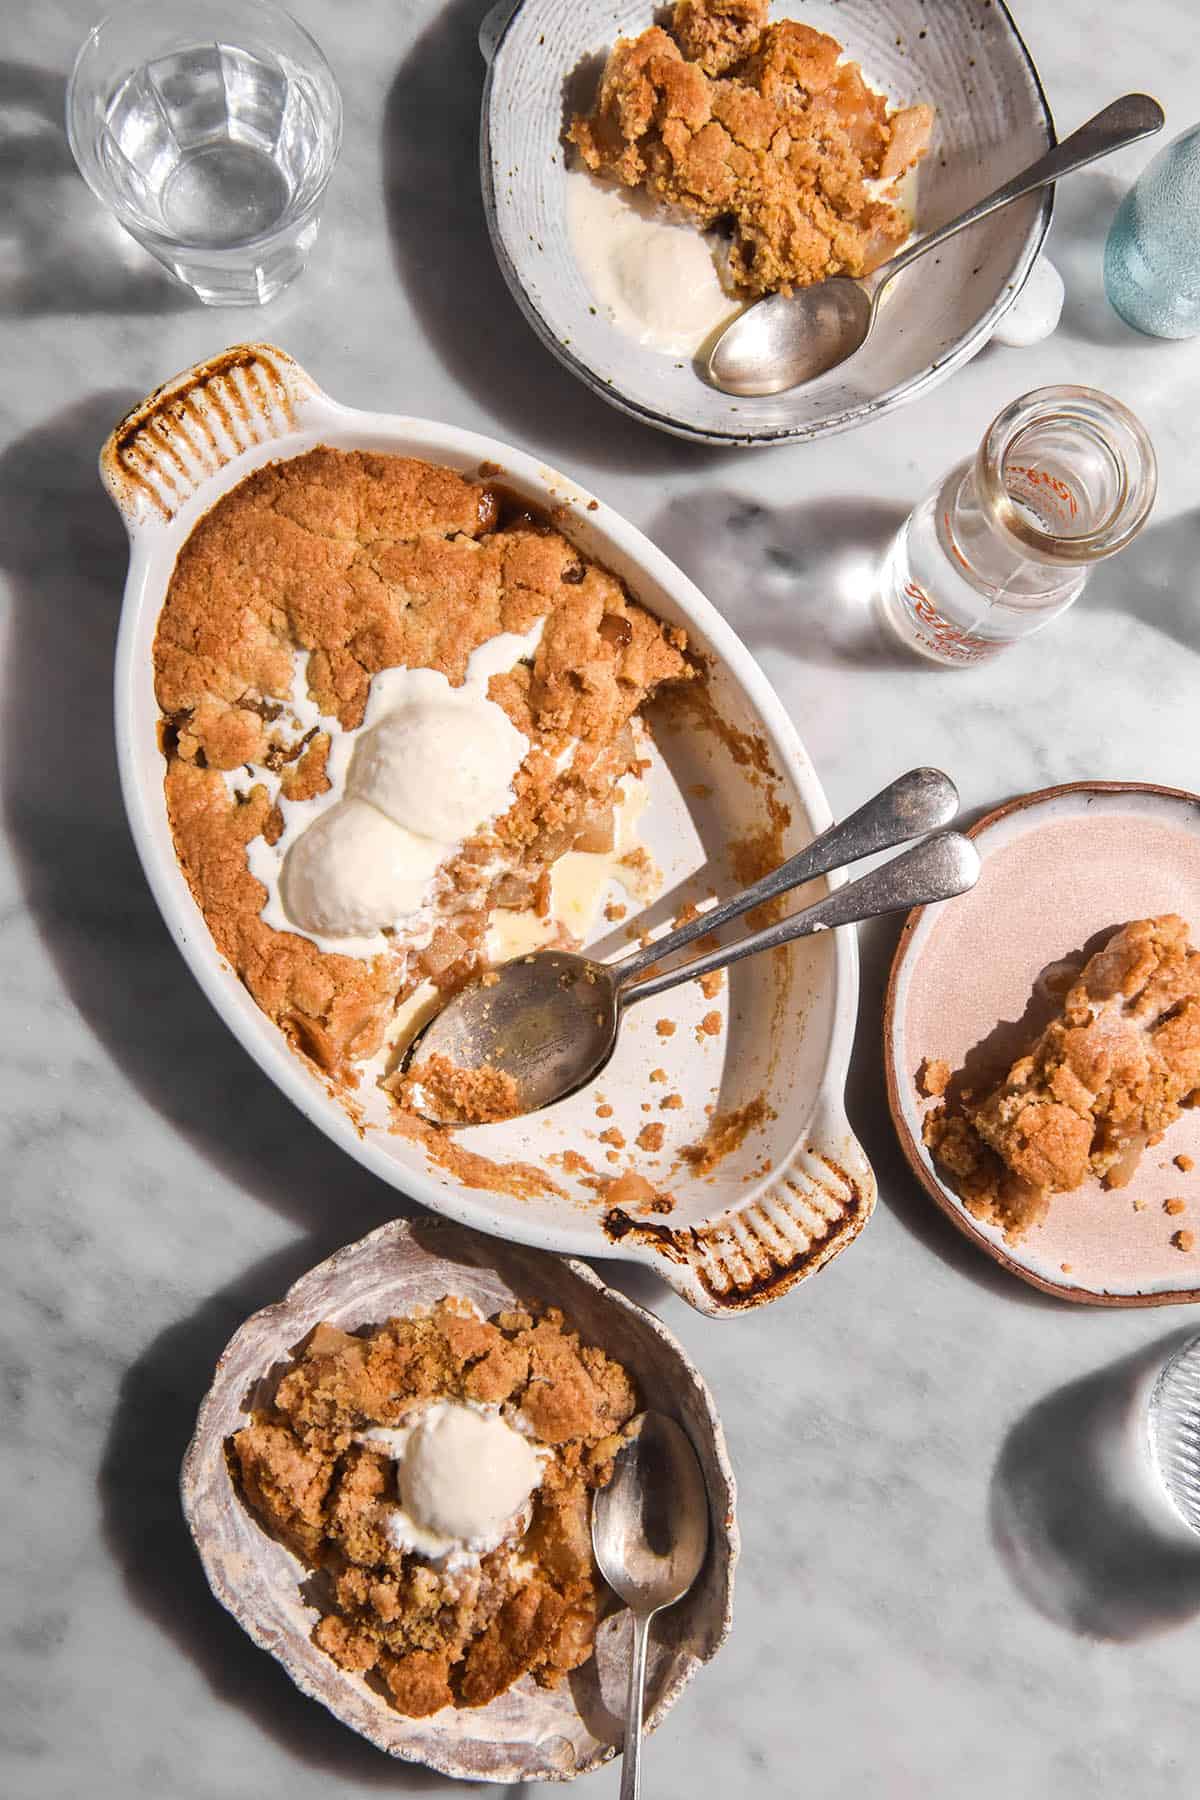 An aerial image of a low FODMAP apple crumble in a white ceramic baking dish on a white marble table. The crumble is topped with two scoops of vanilla ice cream, and has had a few servings removed and two spoons sit in the empty space. The baking dish is surrounded by bowls of crumble topped with vanilla ice cream. 